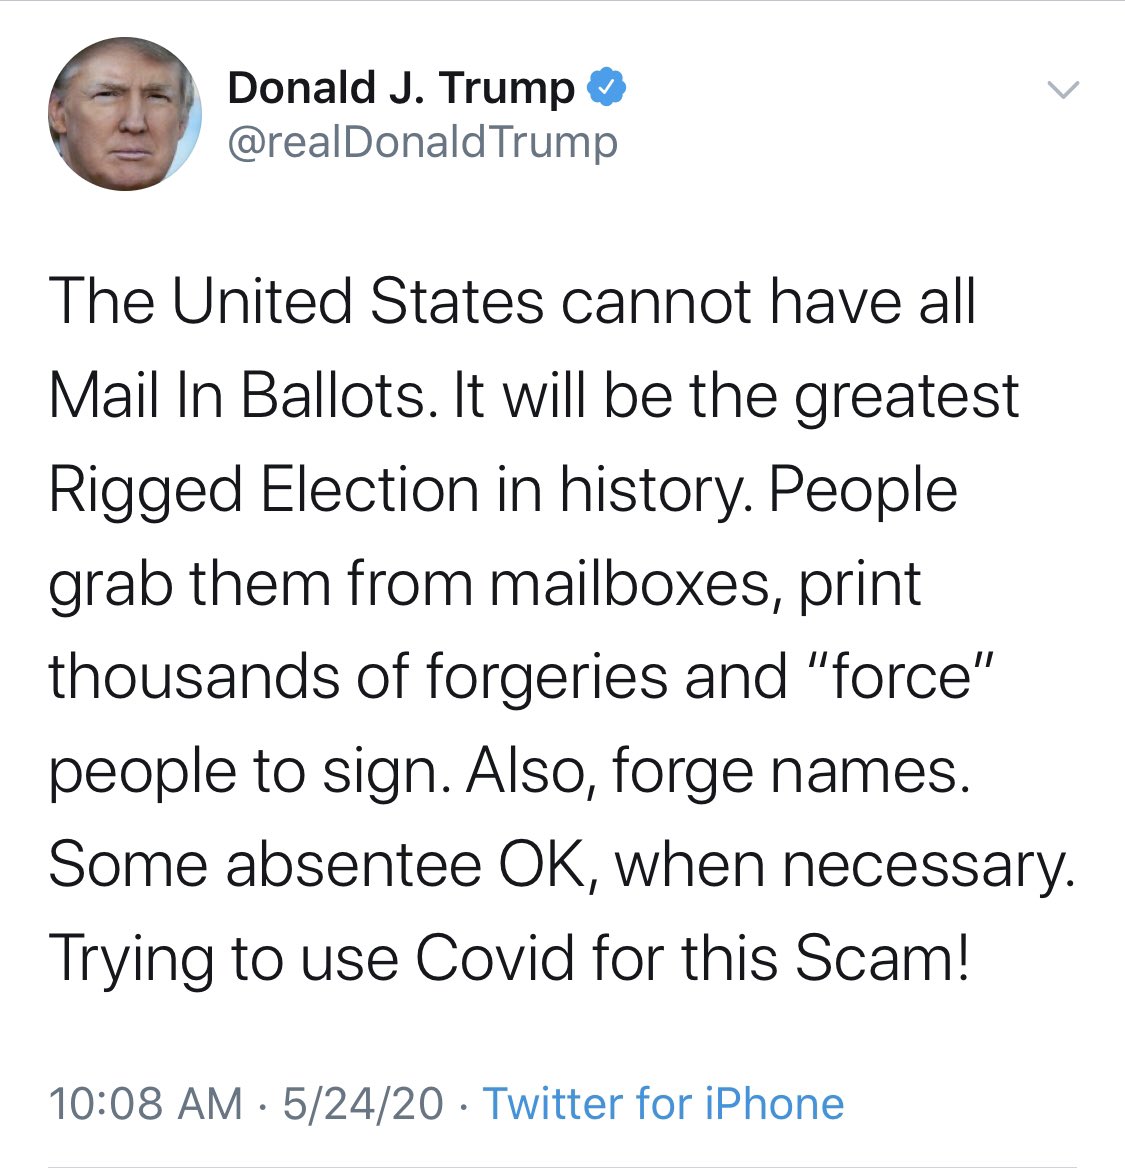 Bless his heart. He has no idea how mail ballots work (though he should since he votes by mail). There are a couple of key layers of security. 1/